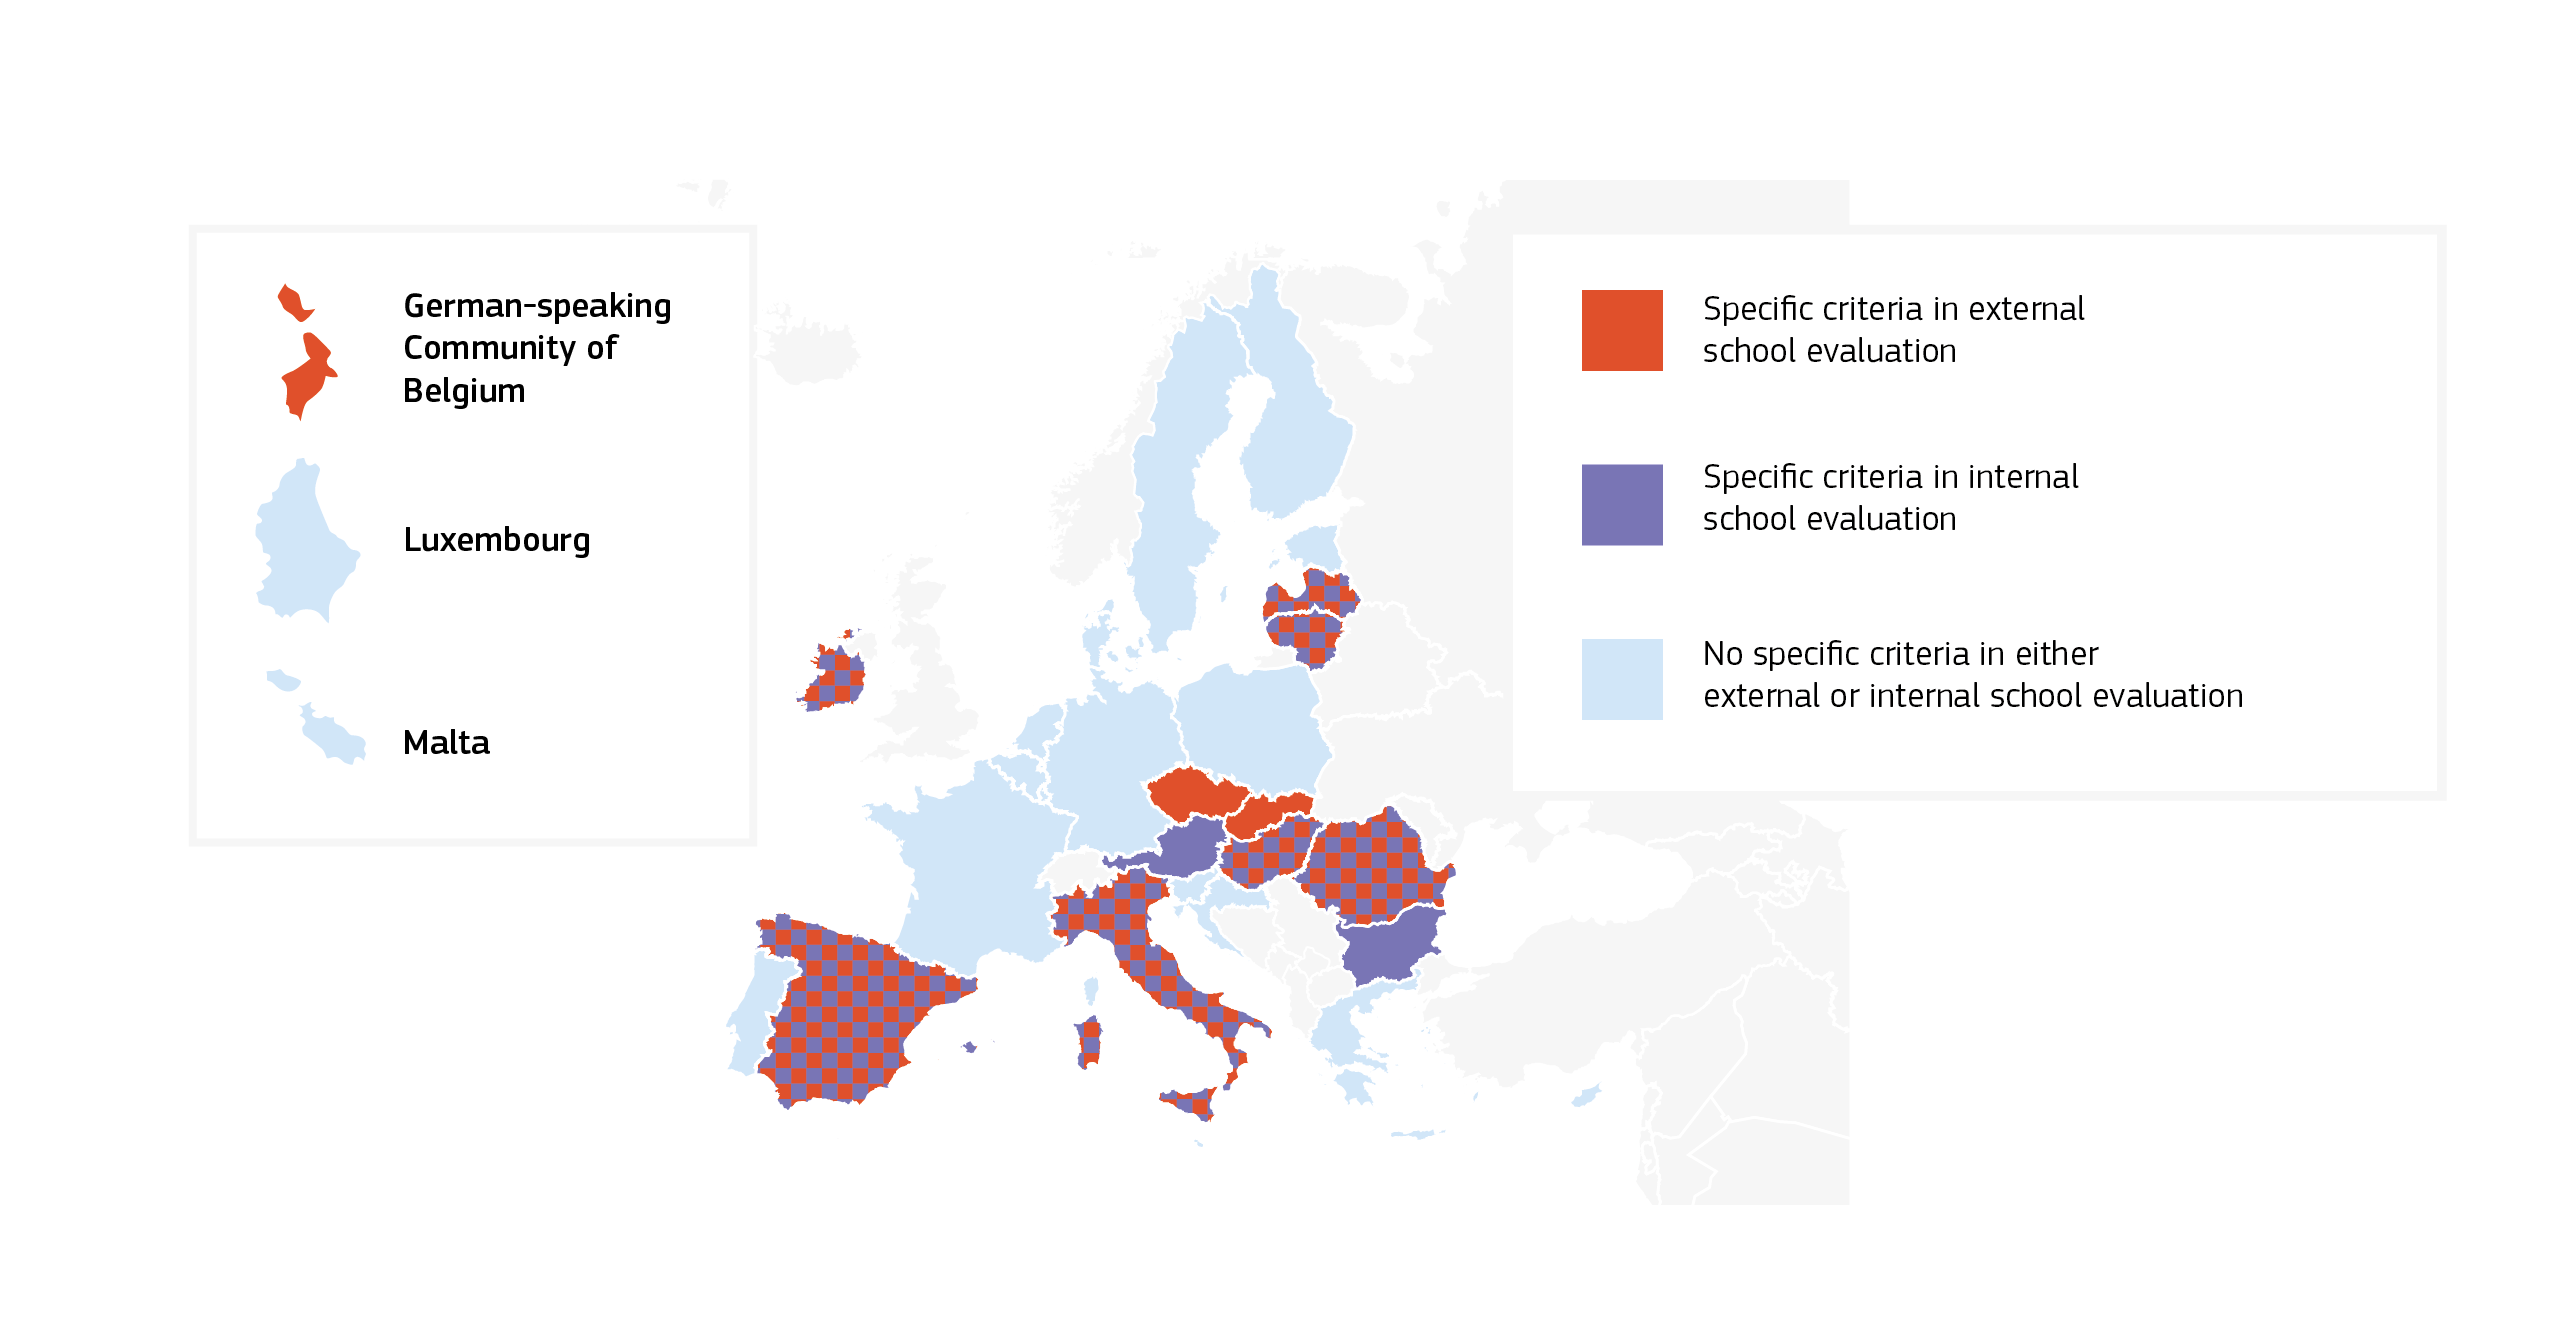 Map showing the distribution of EU education systems according to the existence of specific quality criteria for cross-curricular learning in shool evaluation, wether internal or external (or both). The criteria is present in 12 out of 29 EU education systems.